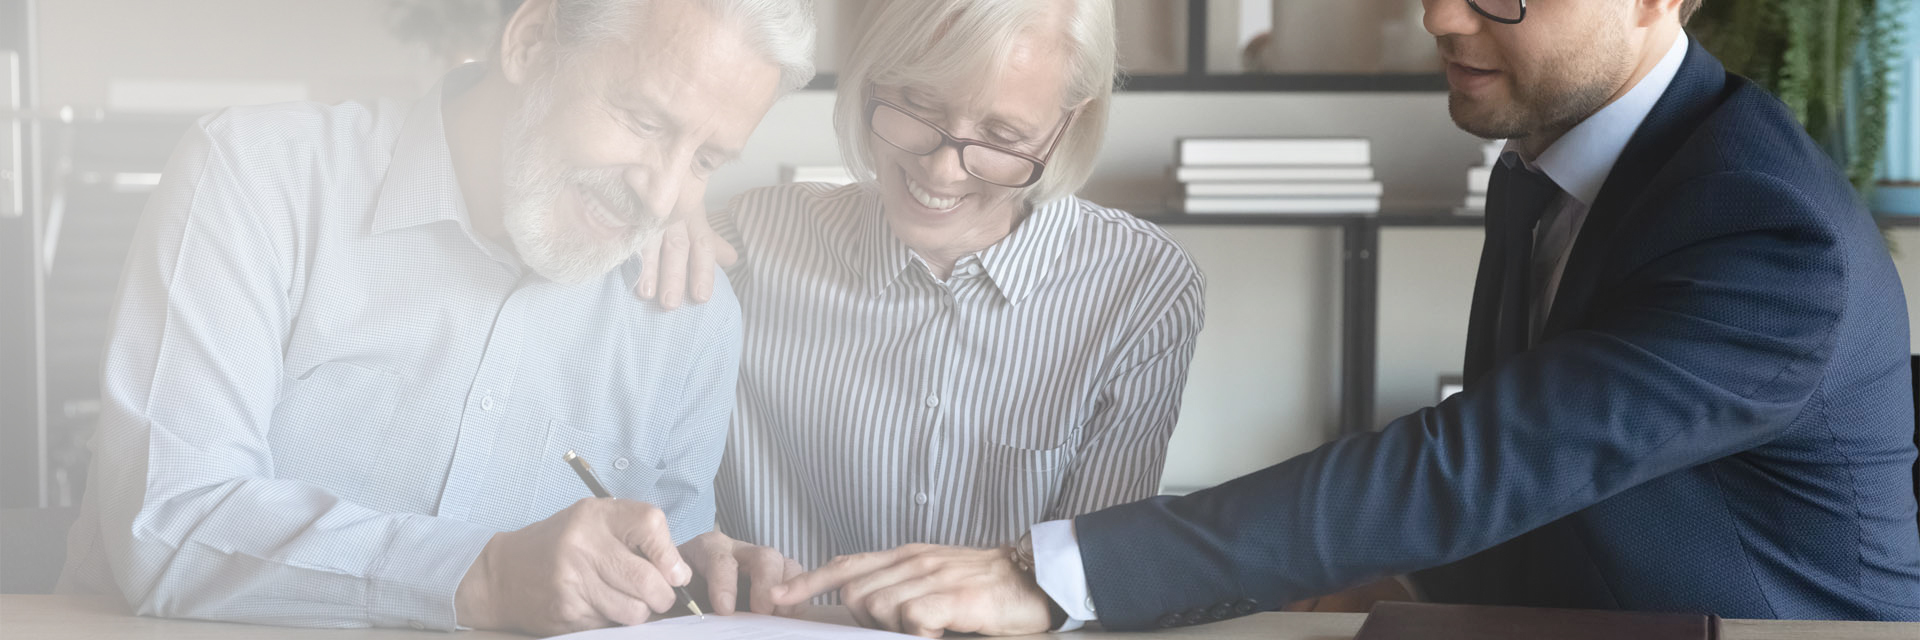 Image showing a happy retired couple in a meeting with an adviser, signing a document